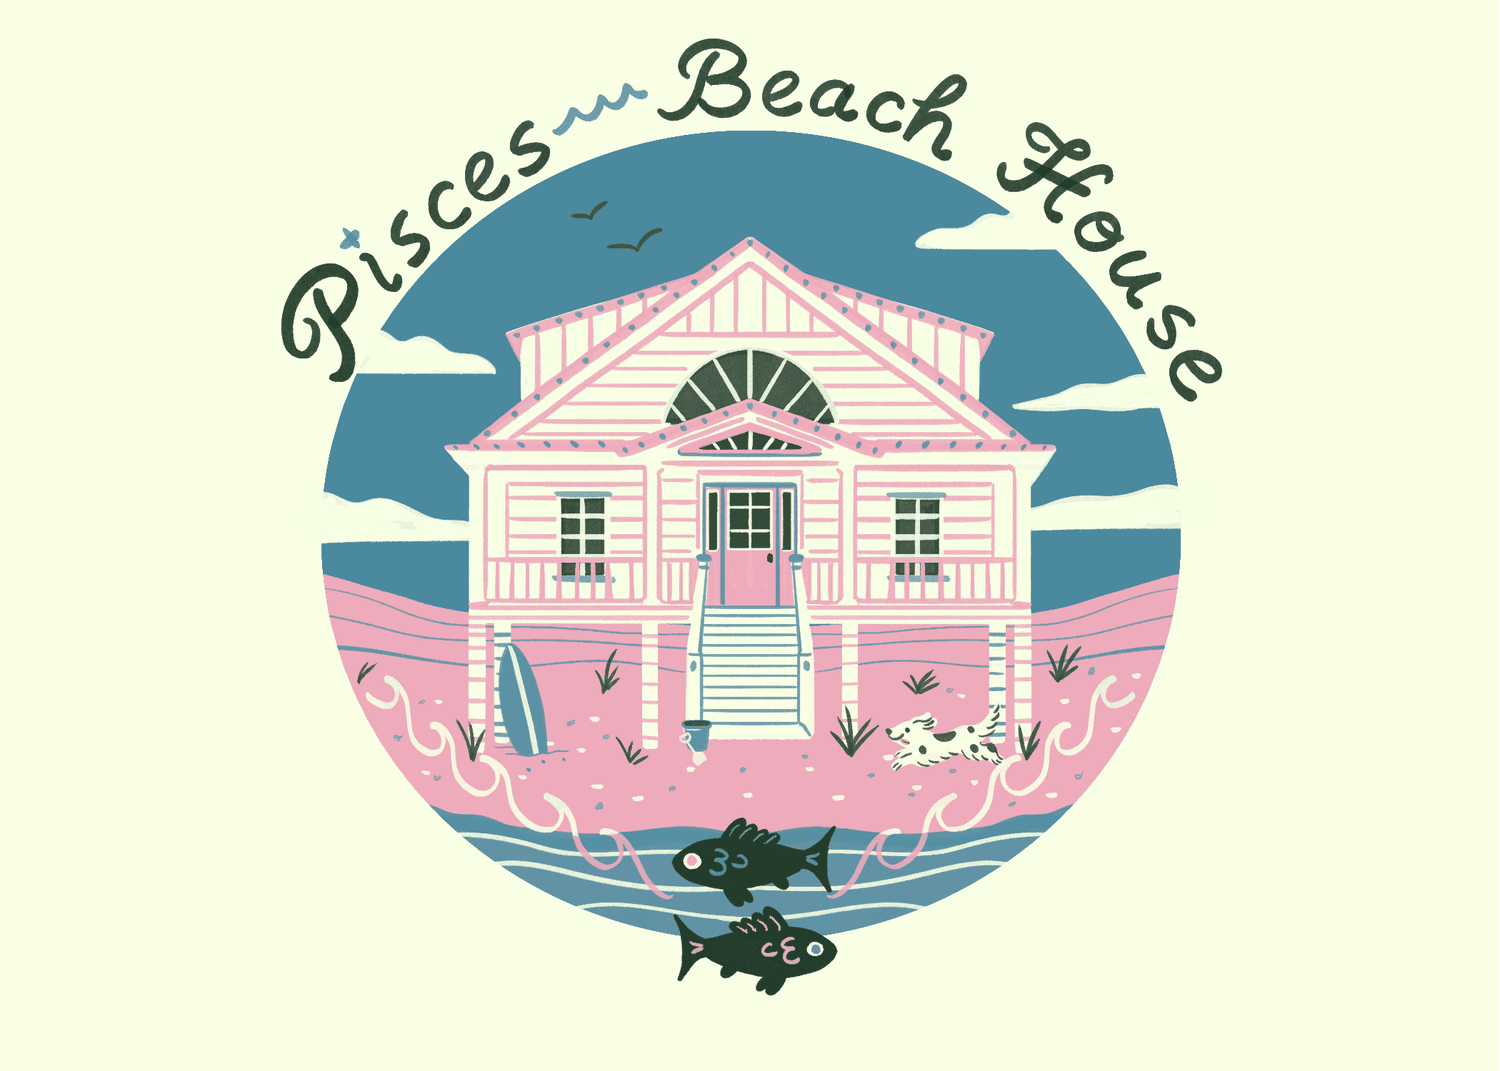 An illustration of a beach house for a pisces